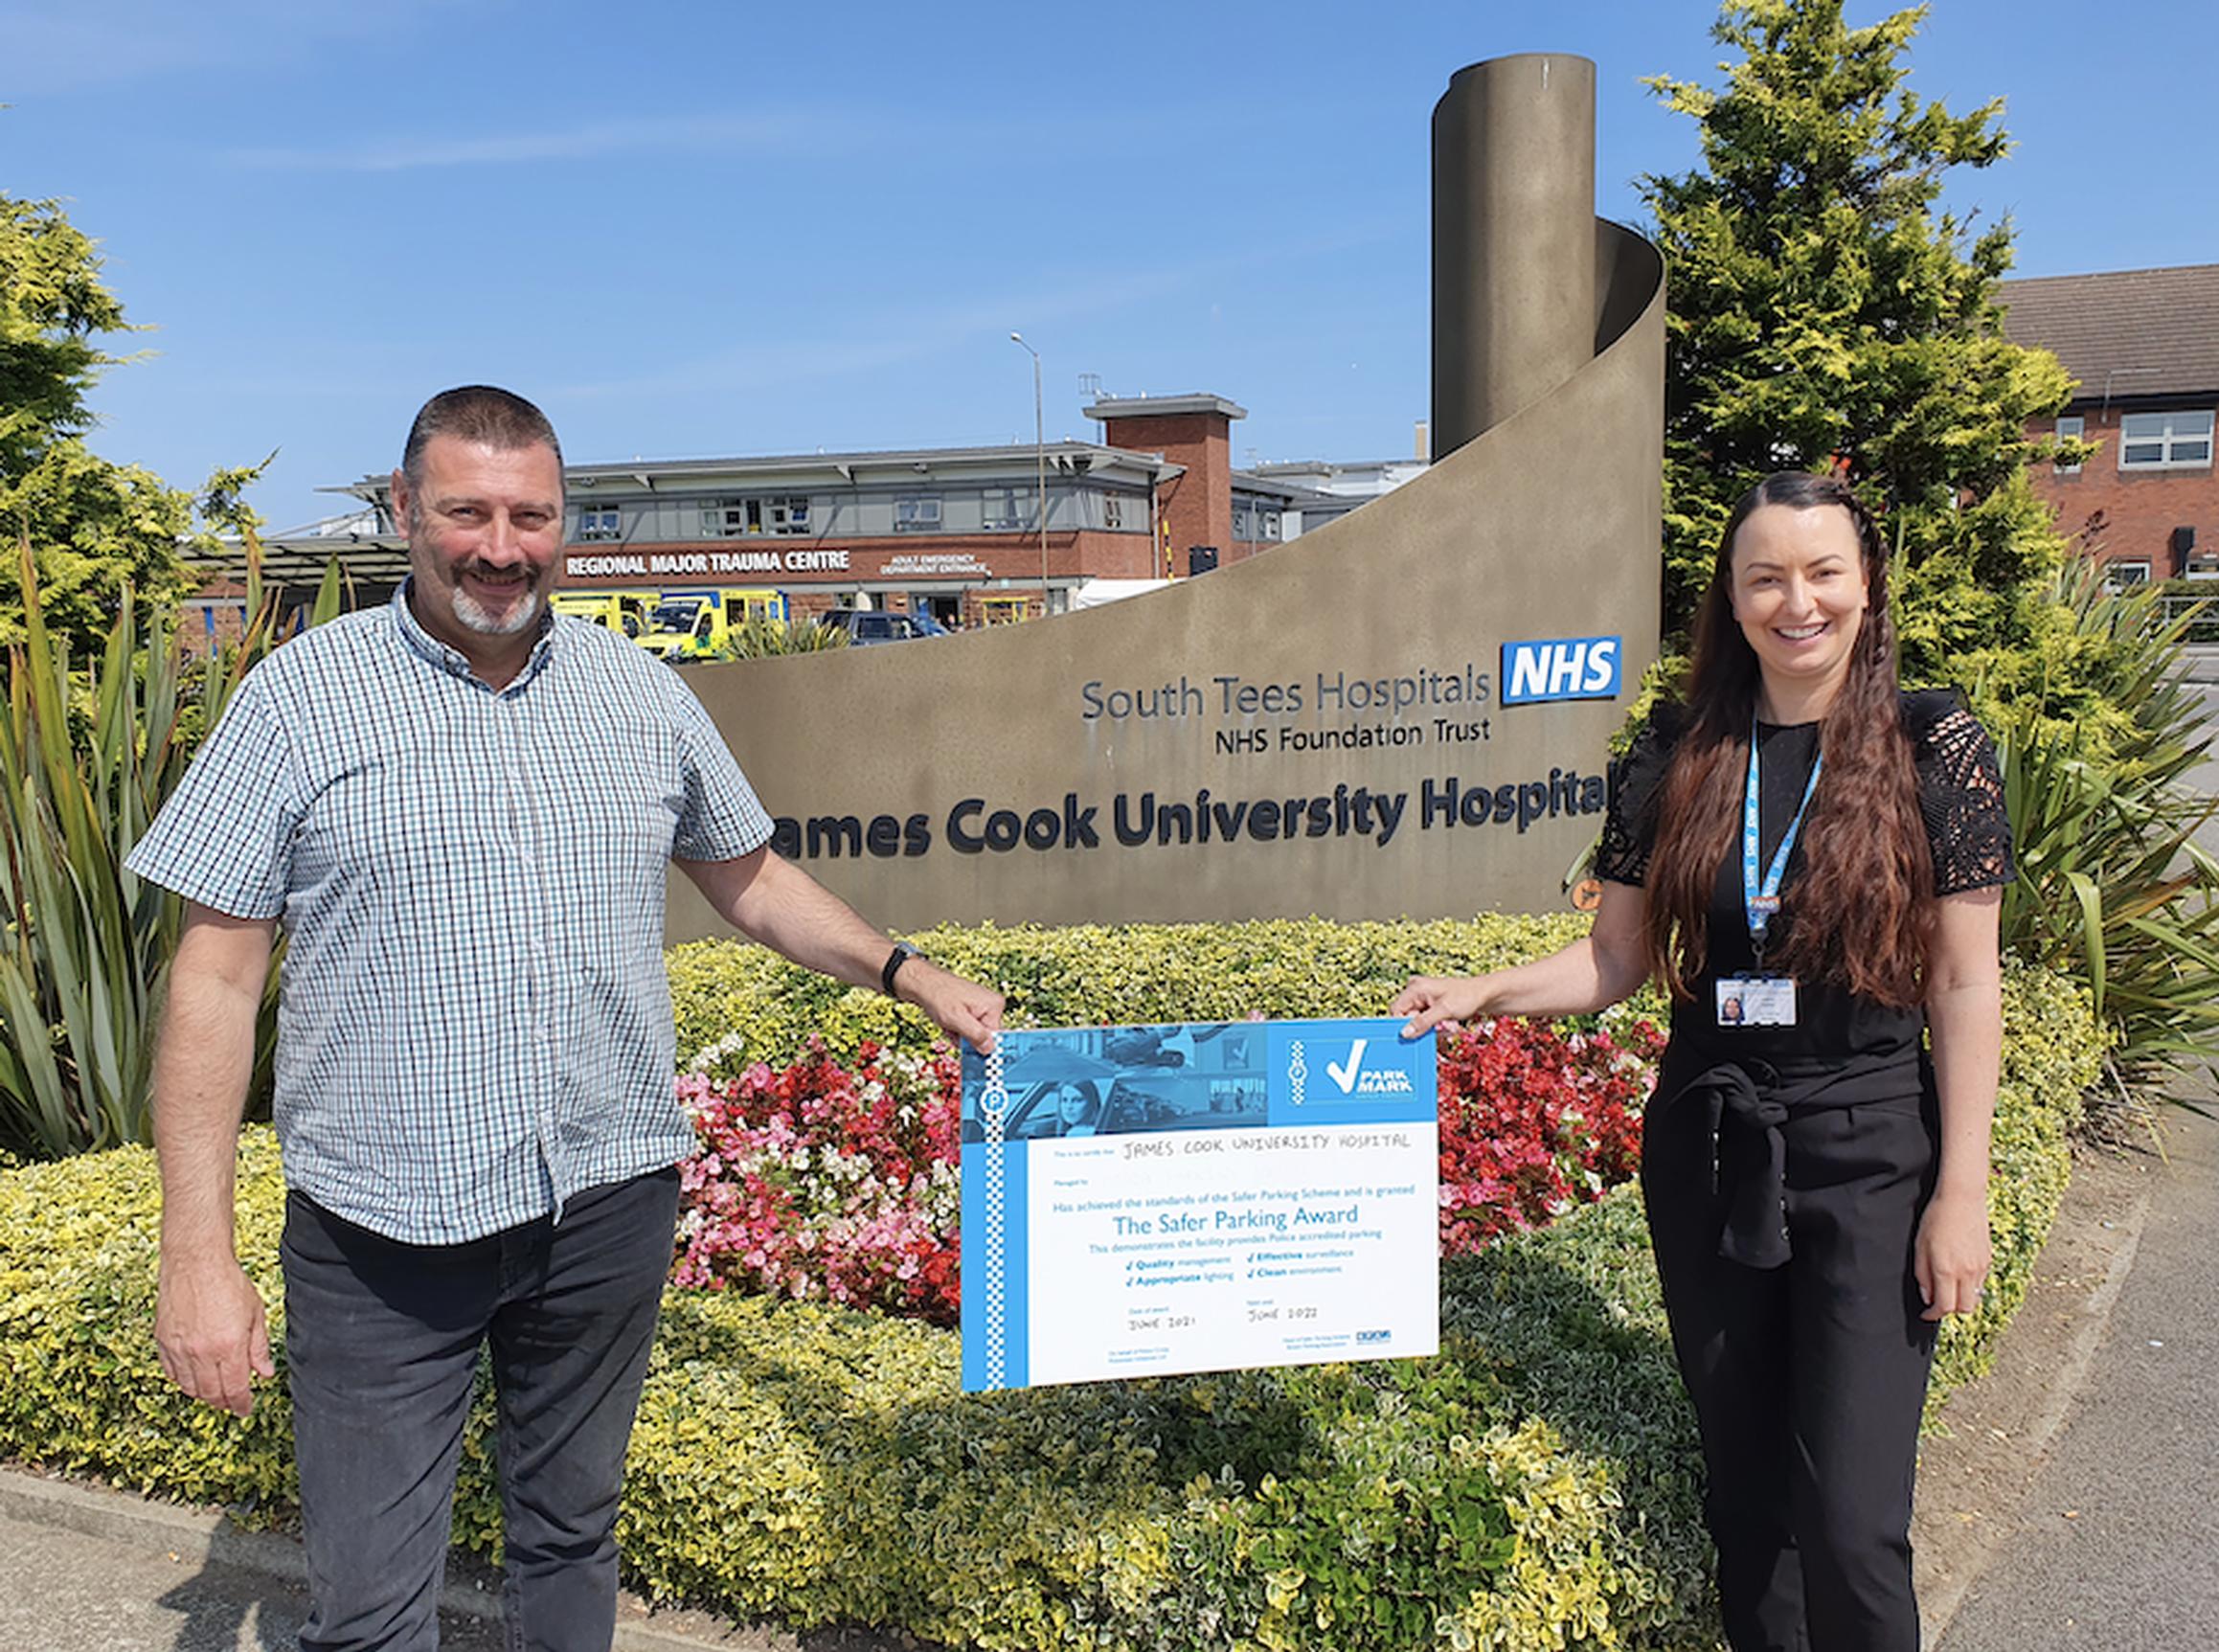 Steve Cranston, architectural liaison officer at Cleveland Police and Laura Hallett, car parking manager at South Tees Hospitals NHS Trust